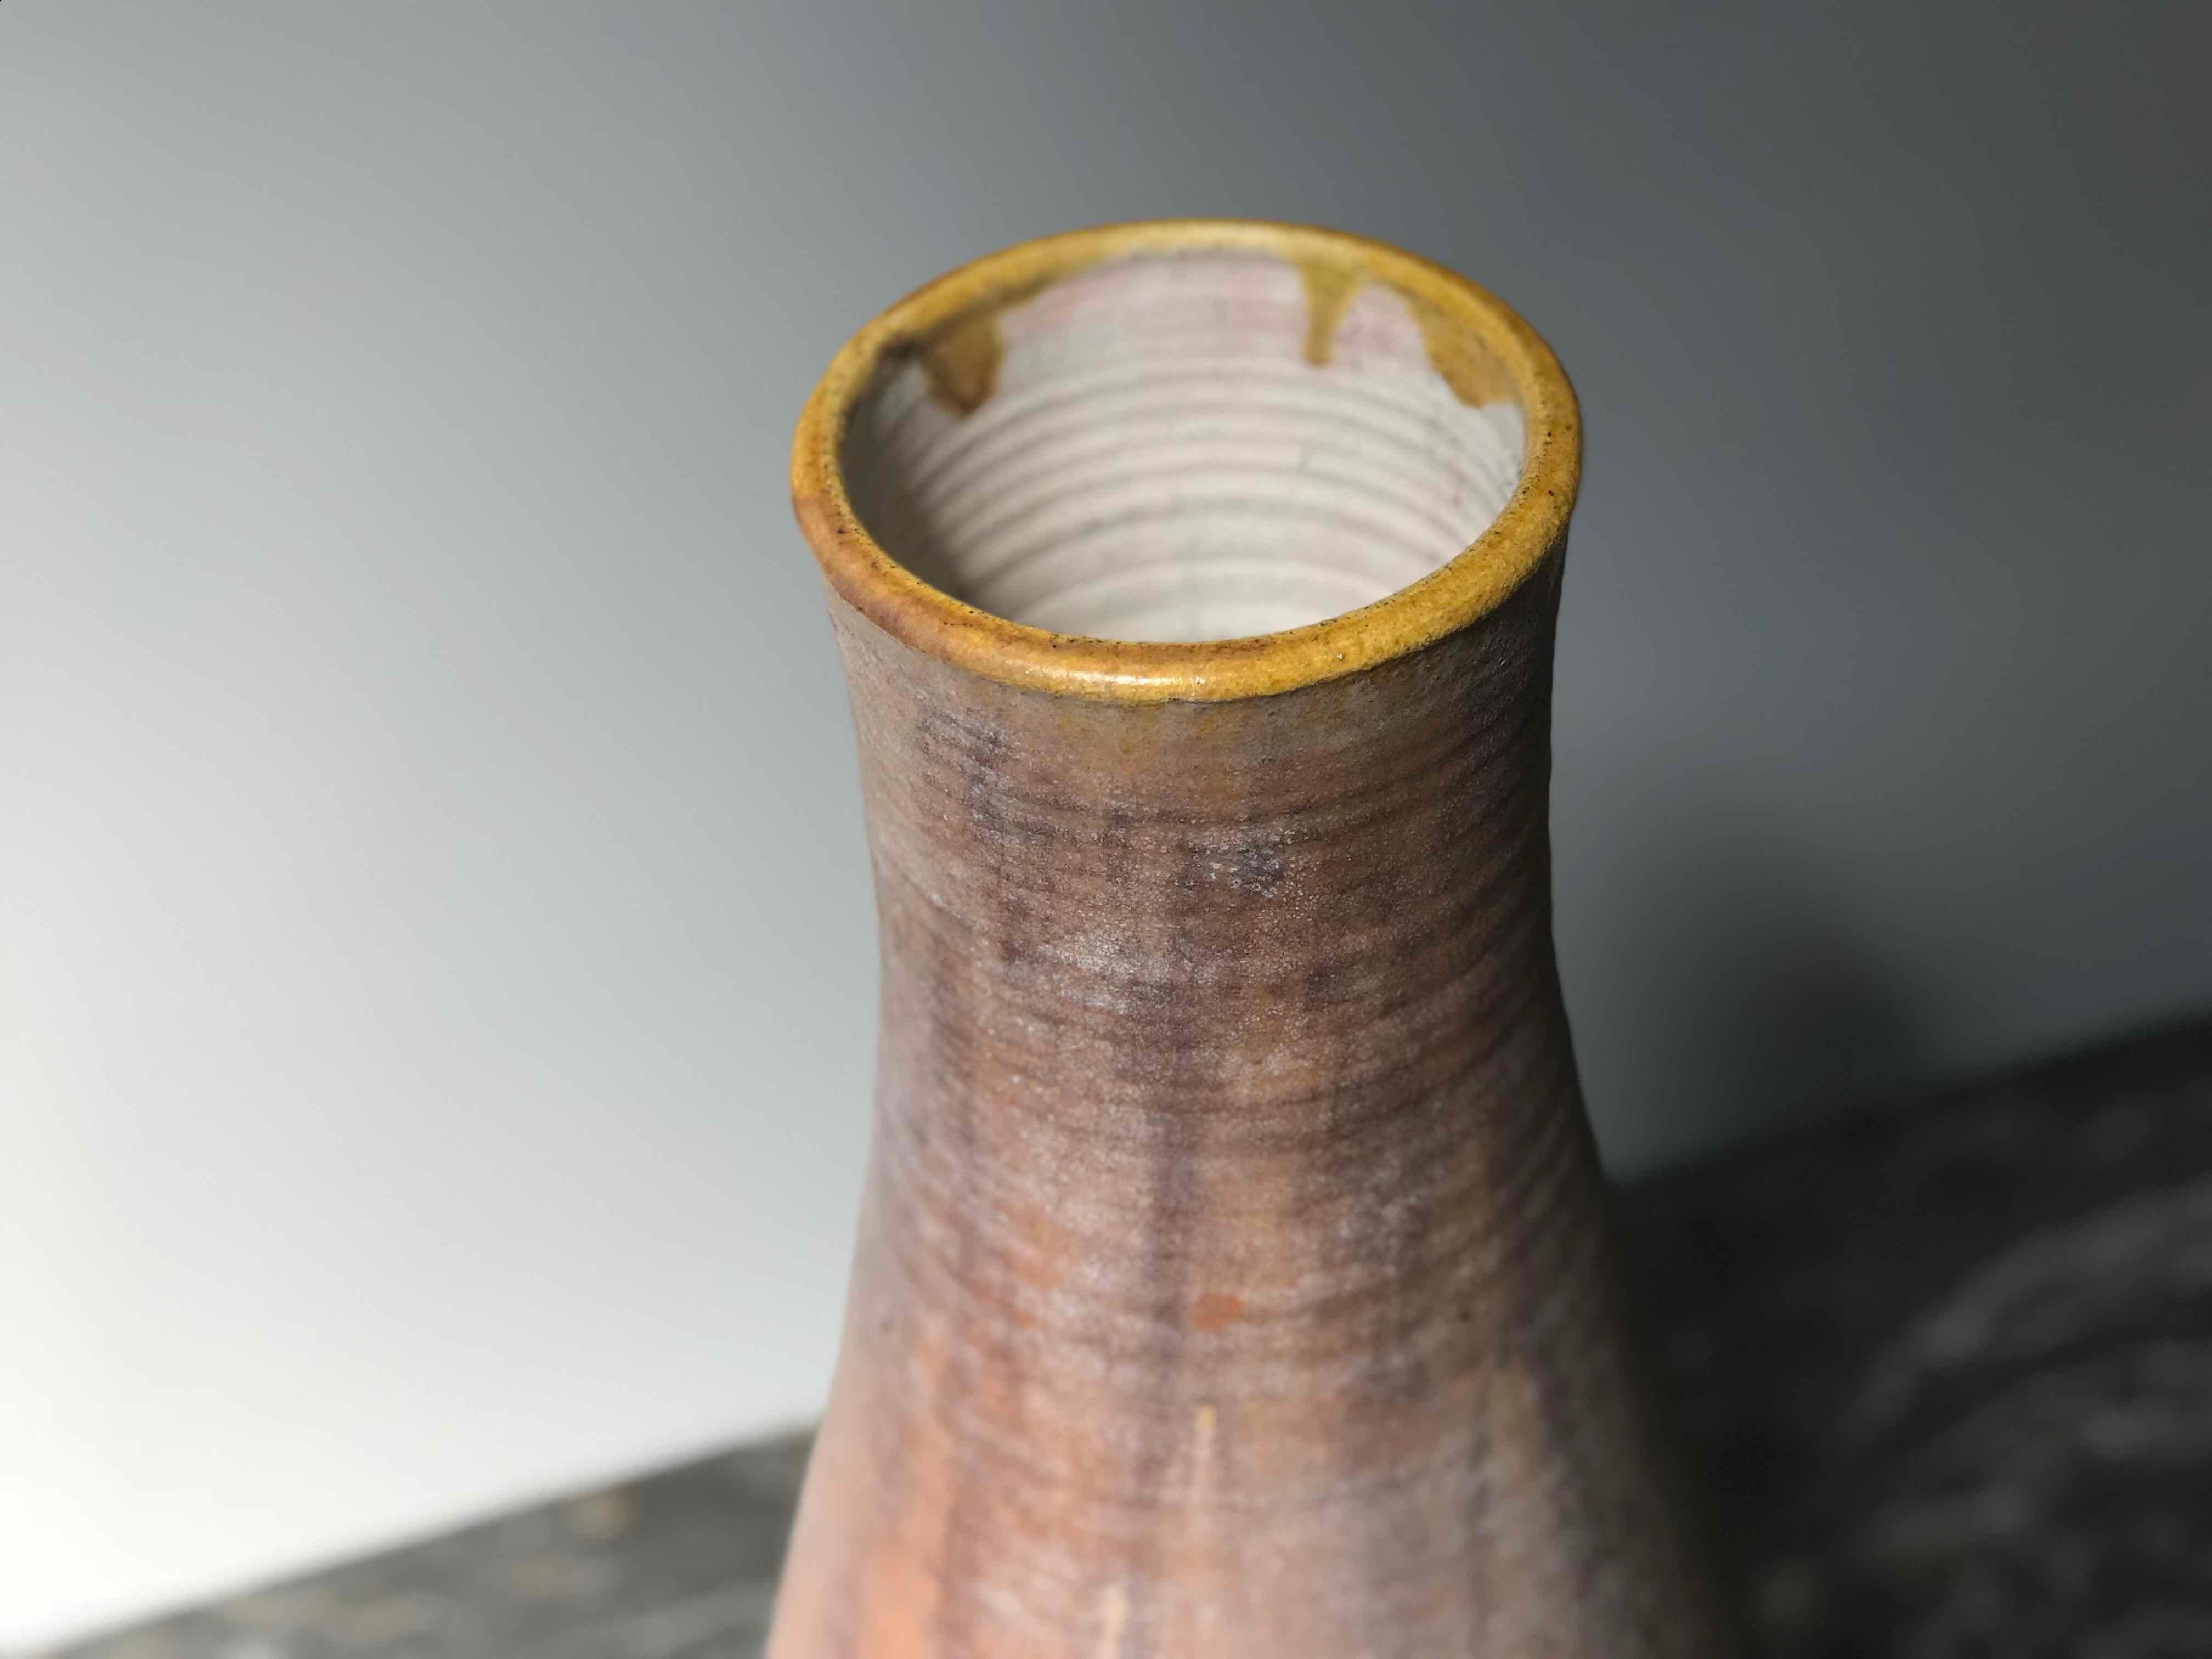 French 1930s Pottery Vase with Natural Orange Exterior and Glazed Interior from France